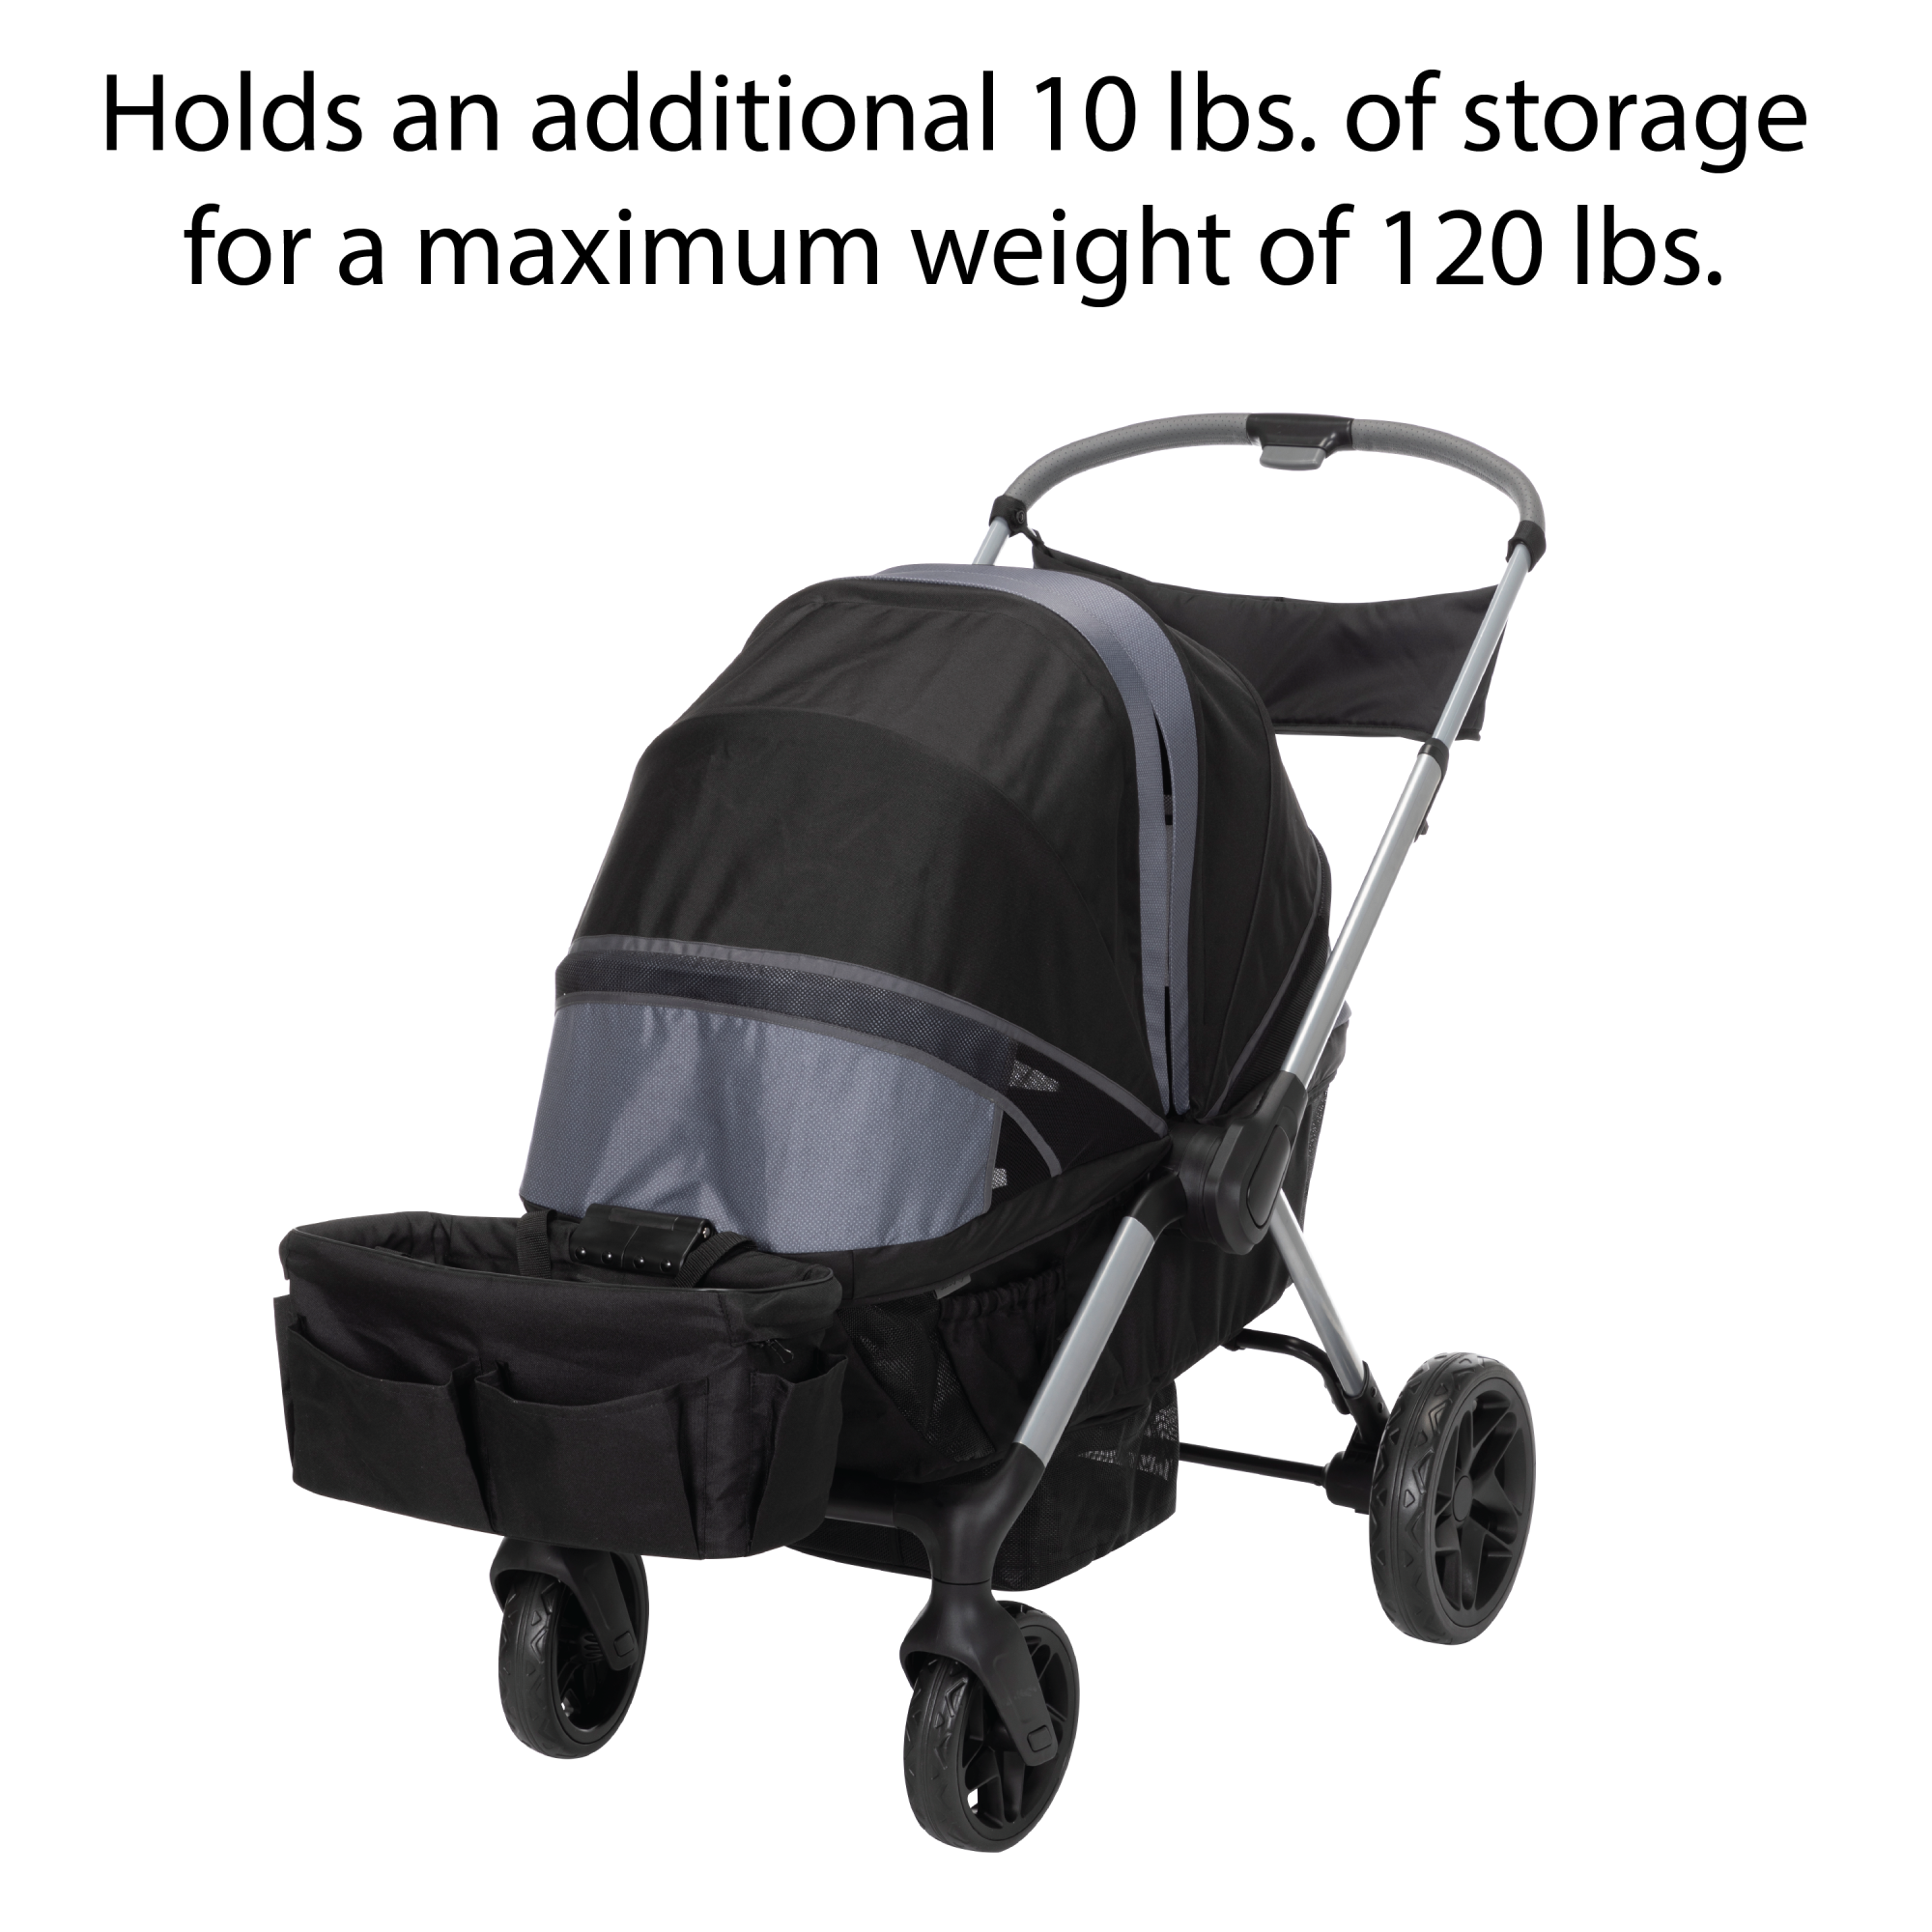 Summit Wagon Stroller - easy compact fold for self-standing storage